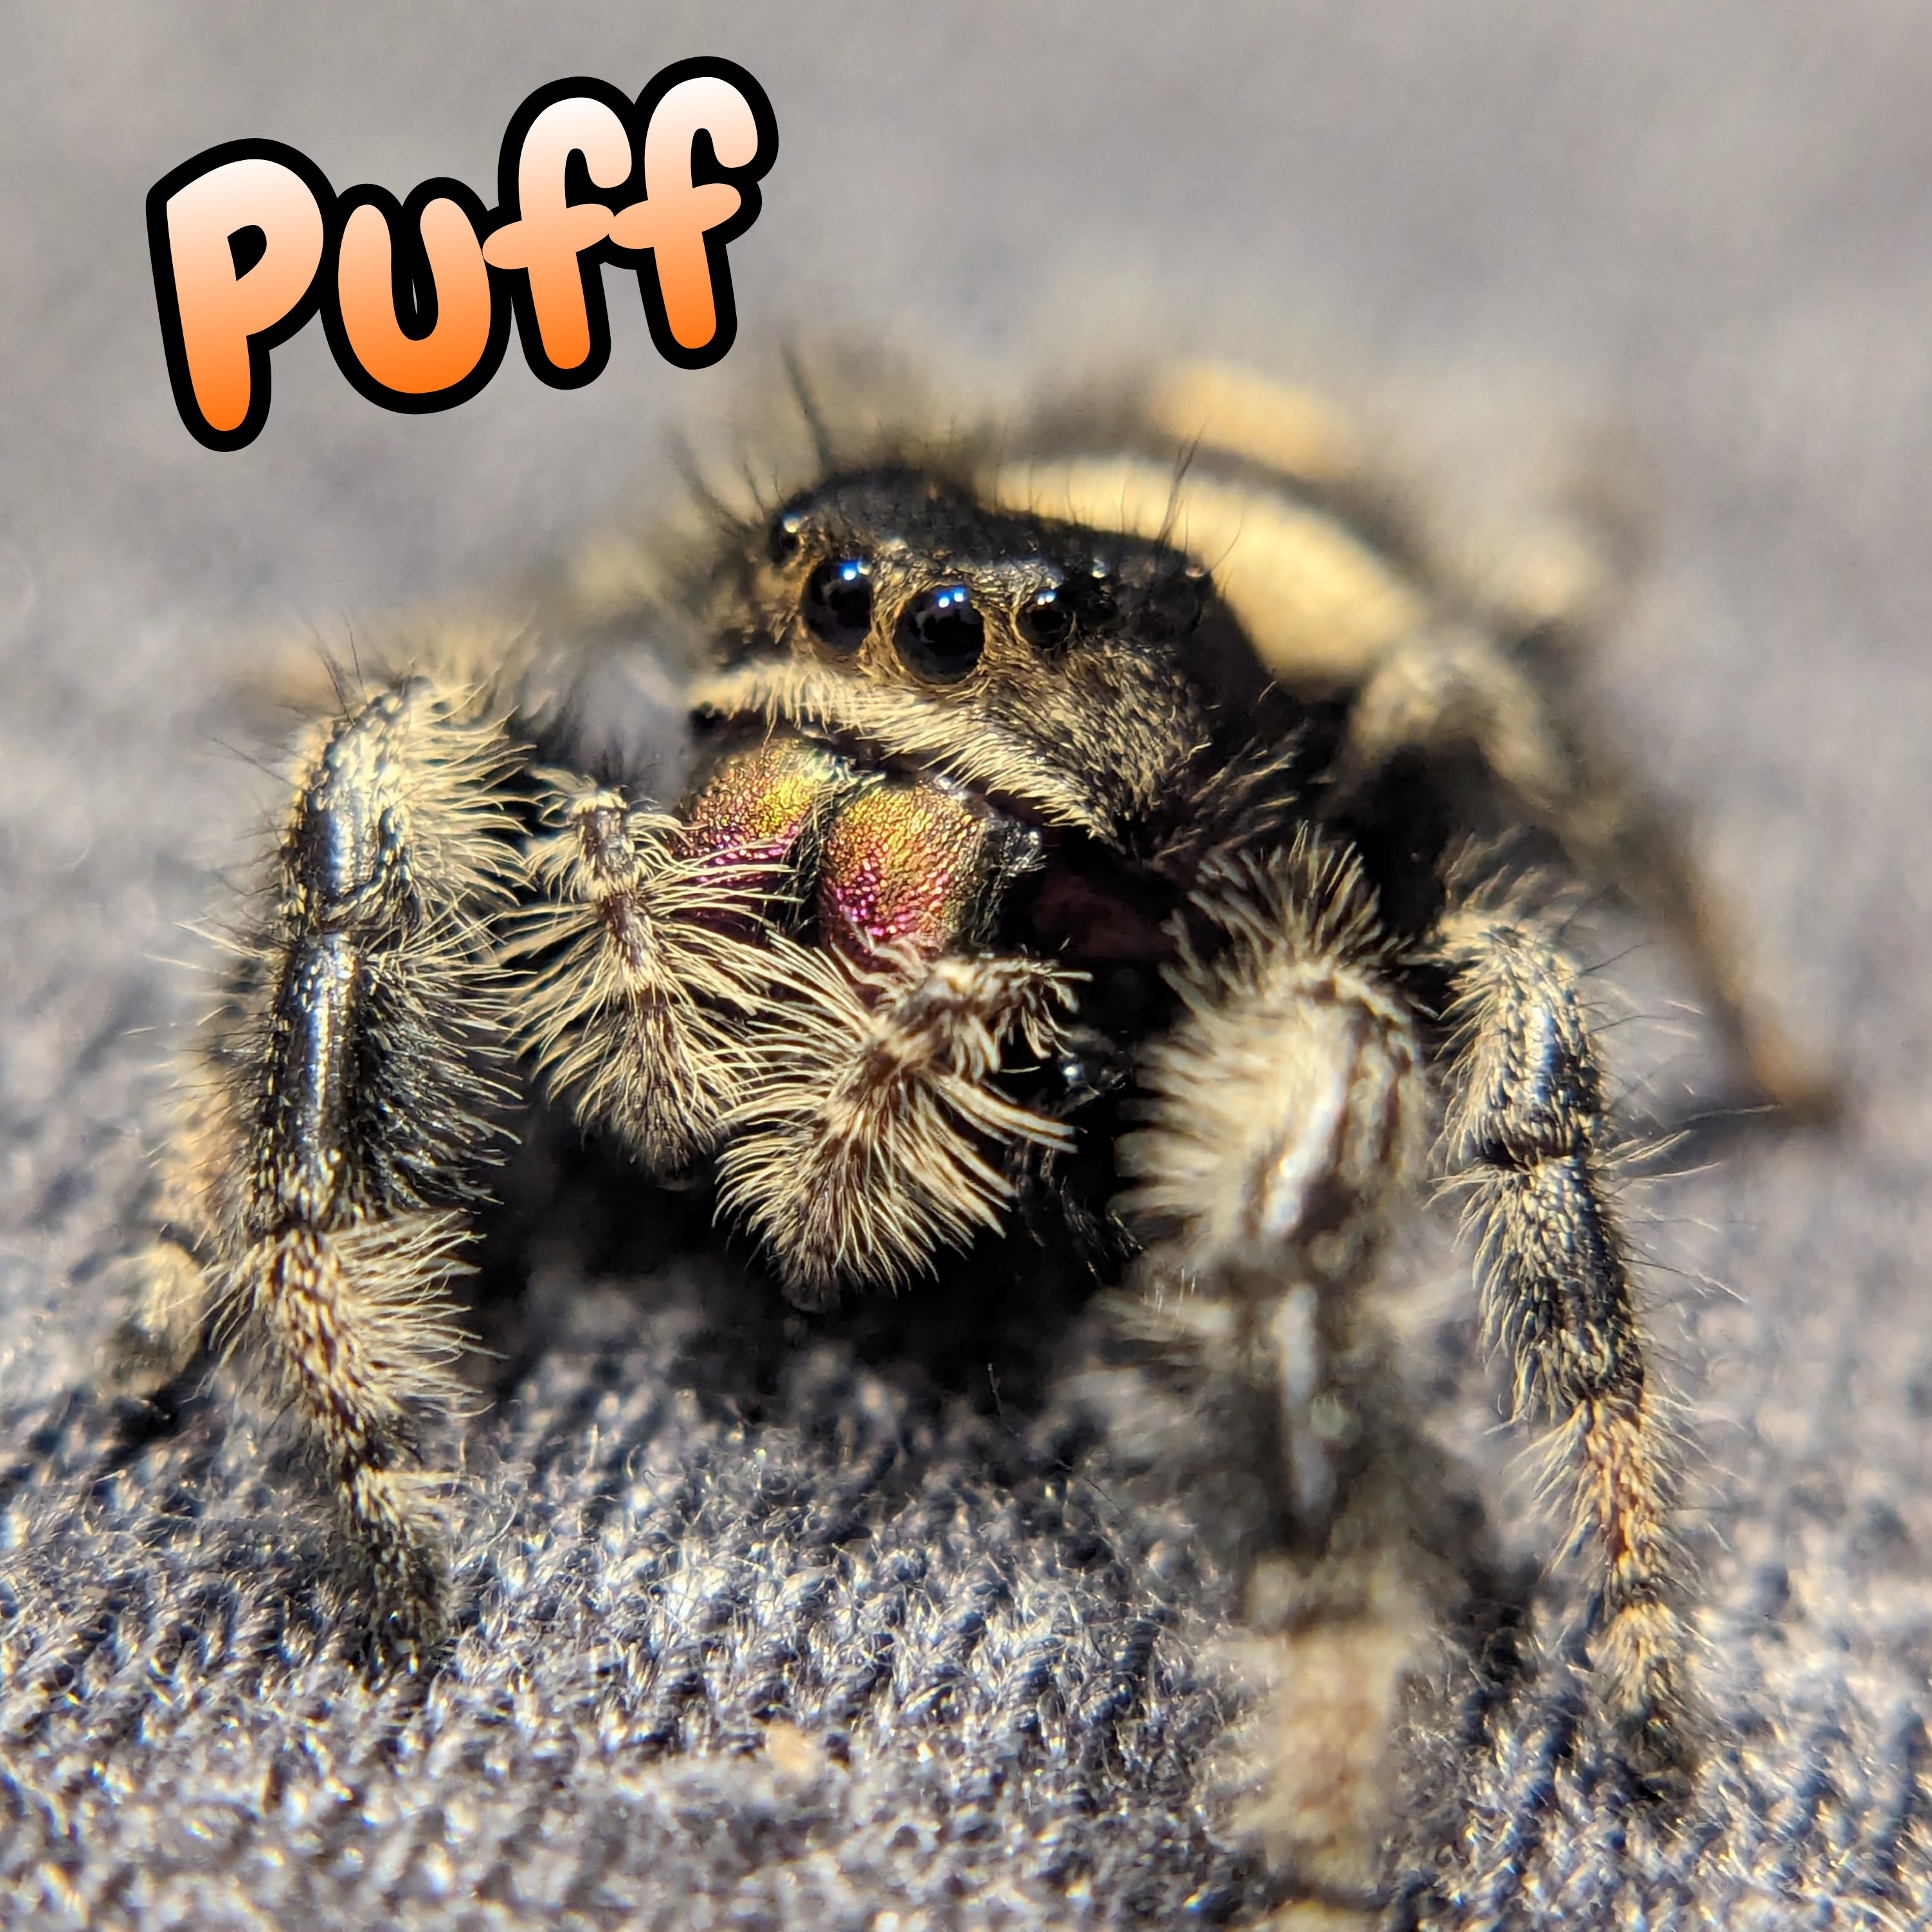 Regal Jumping Spider "Puff"